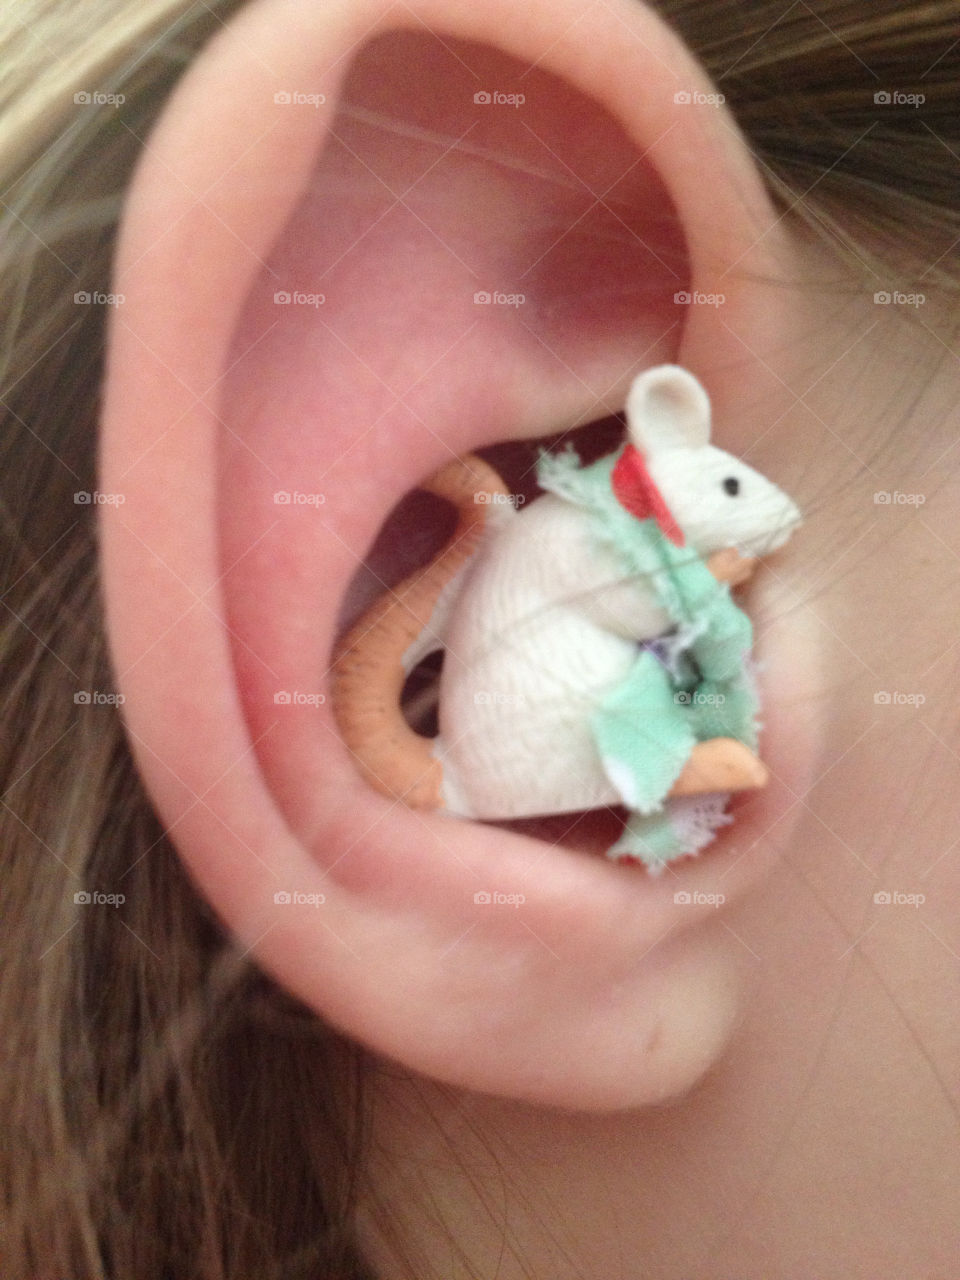 A peep in your ear